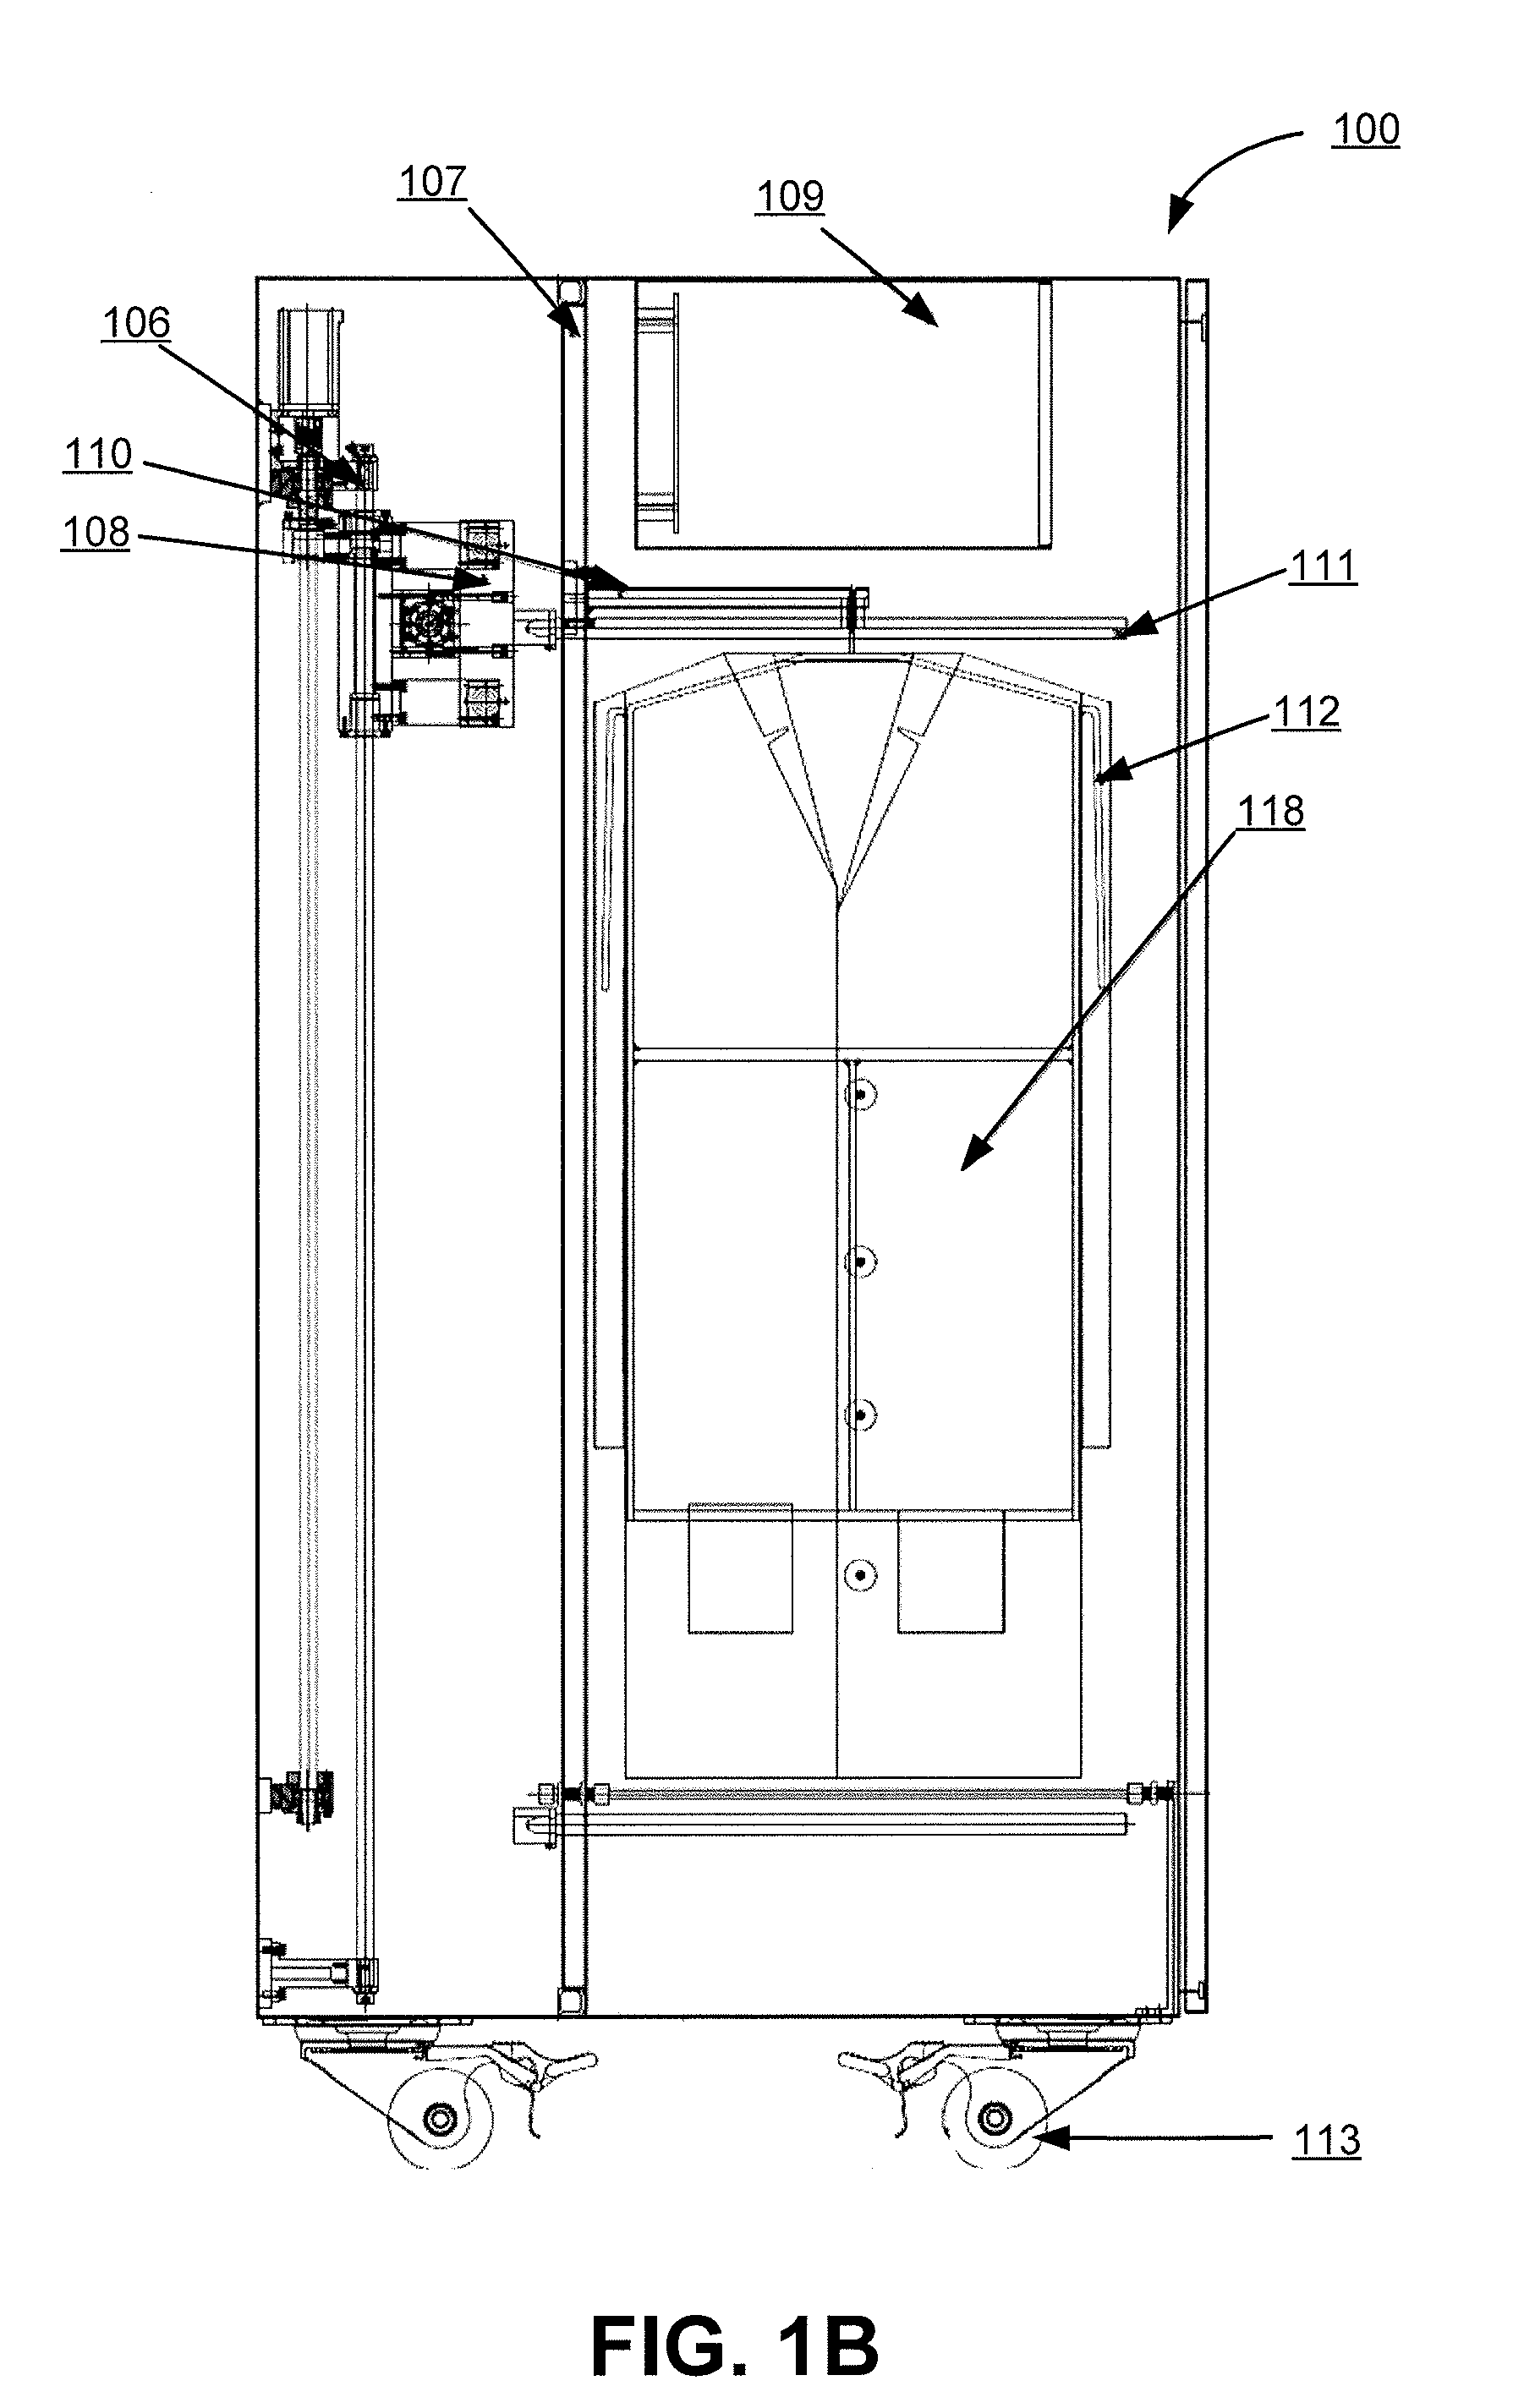 Method and apparatus for the disinfection or sterilization of medical apparel and accessories